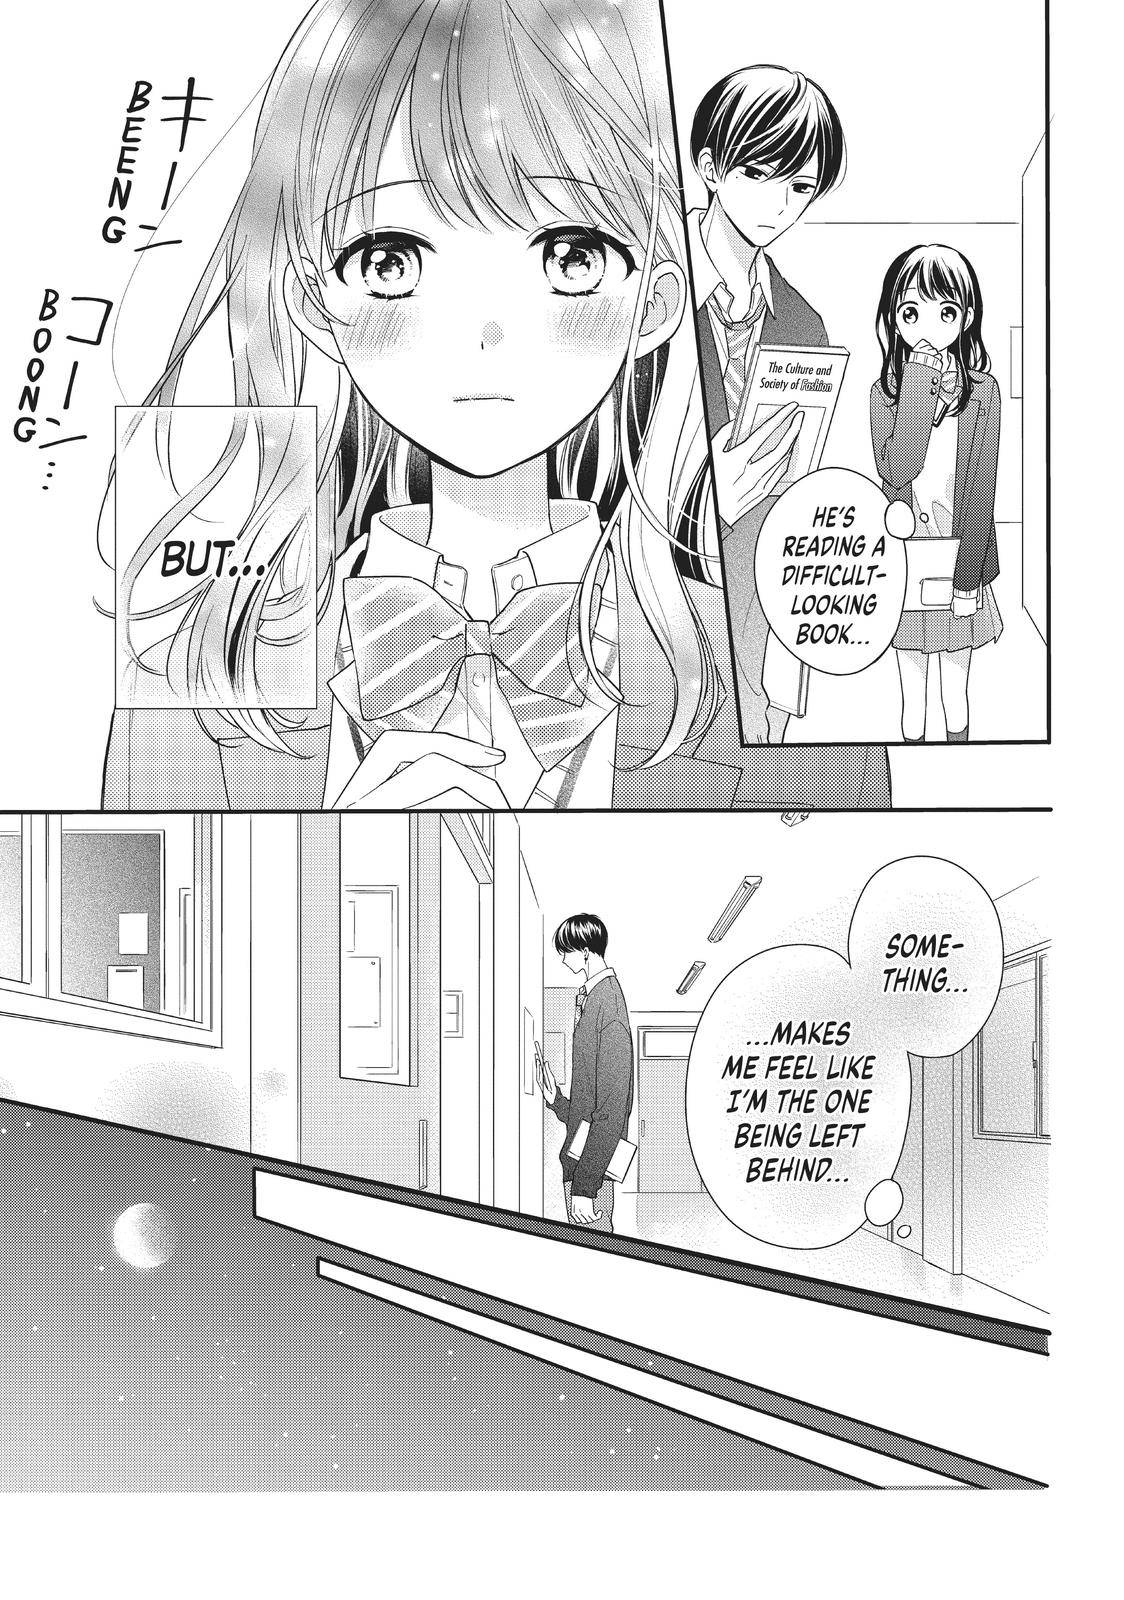 Chihiro-kun Only Has Eyes for Me - chapter 15 - #5